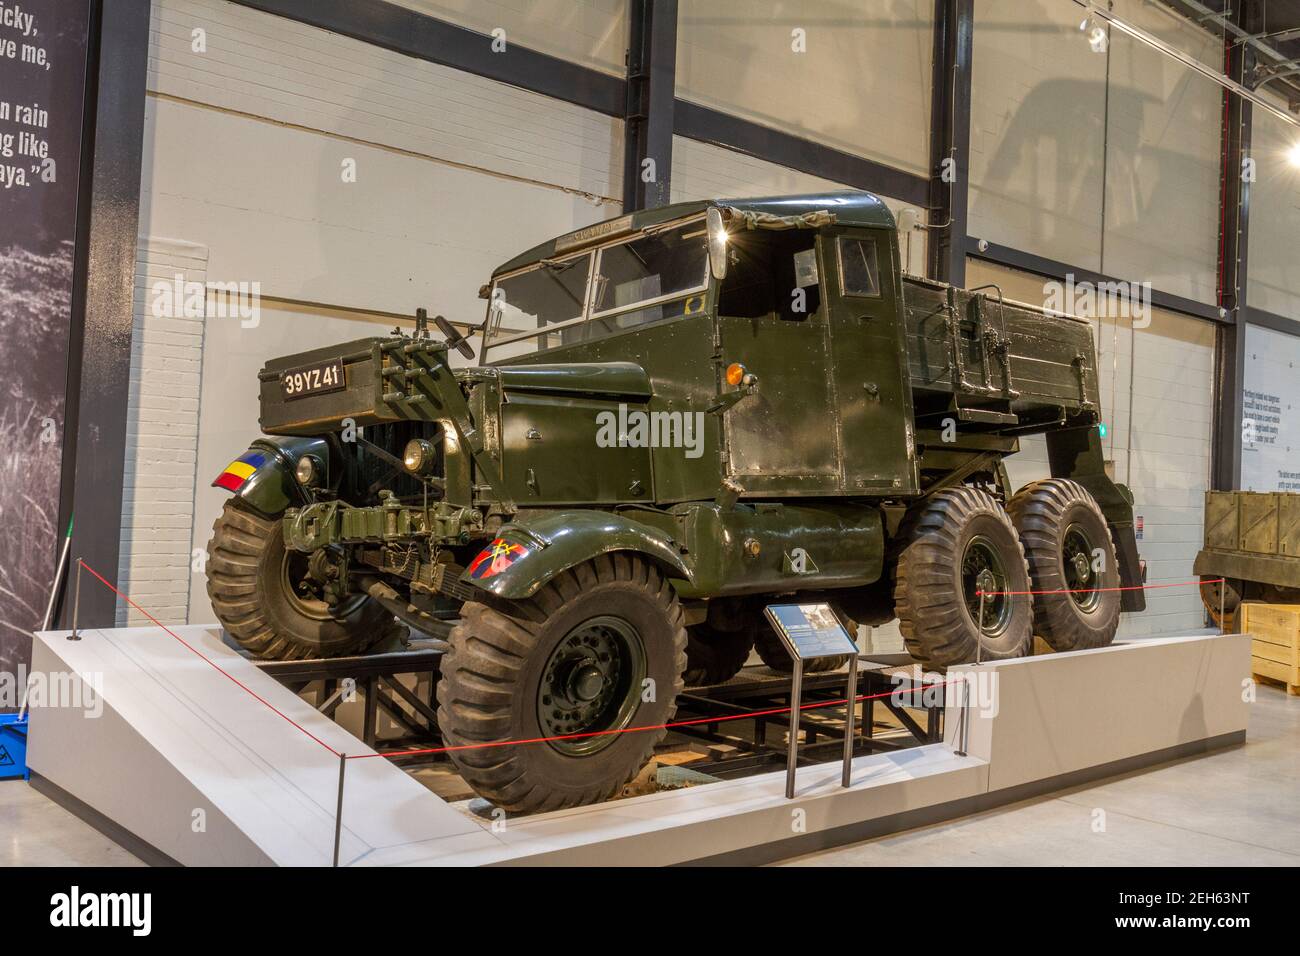 A Scammell Pioneer recovery vehicle in the REME Museum (Royal Electrical and Mechanical Engineers), Lyneham, Wiltshire, UK. Stock Photo